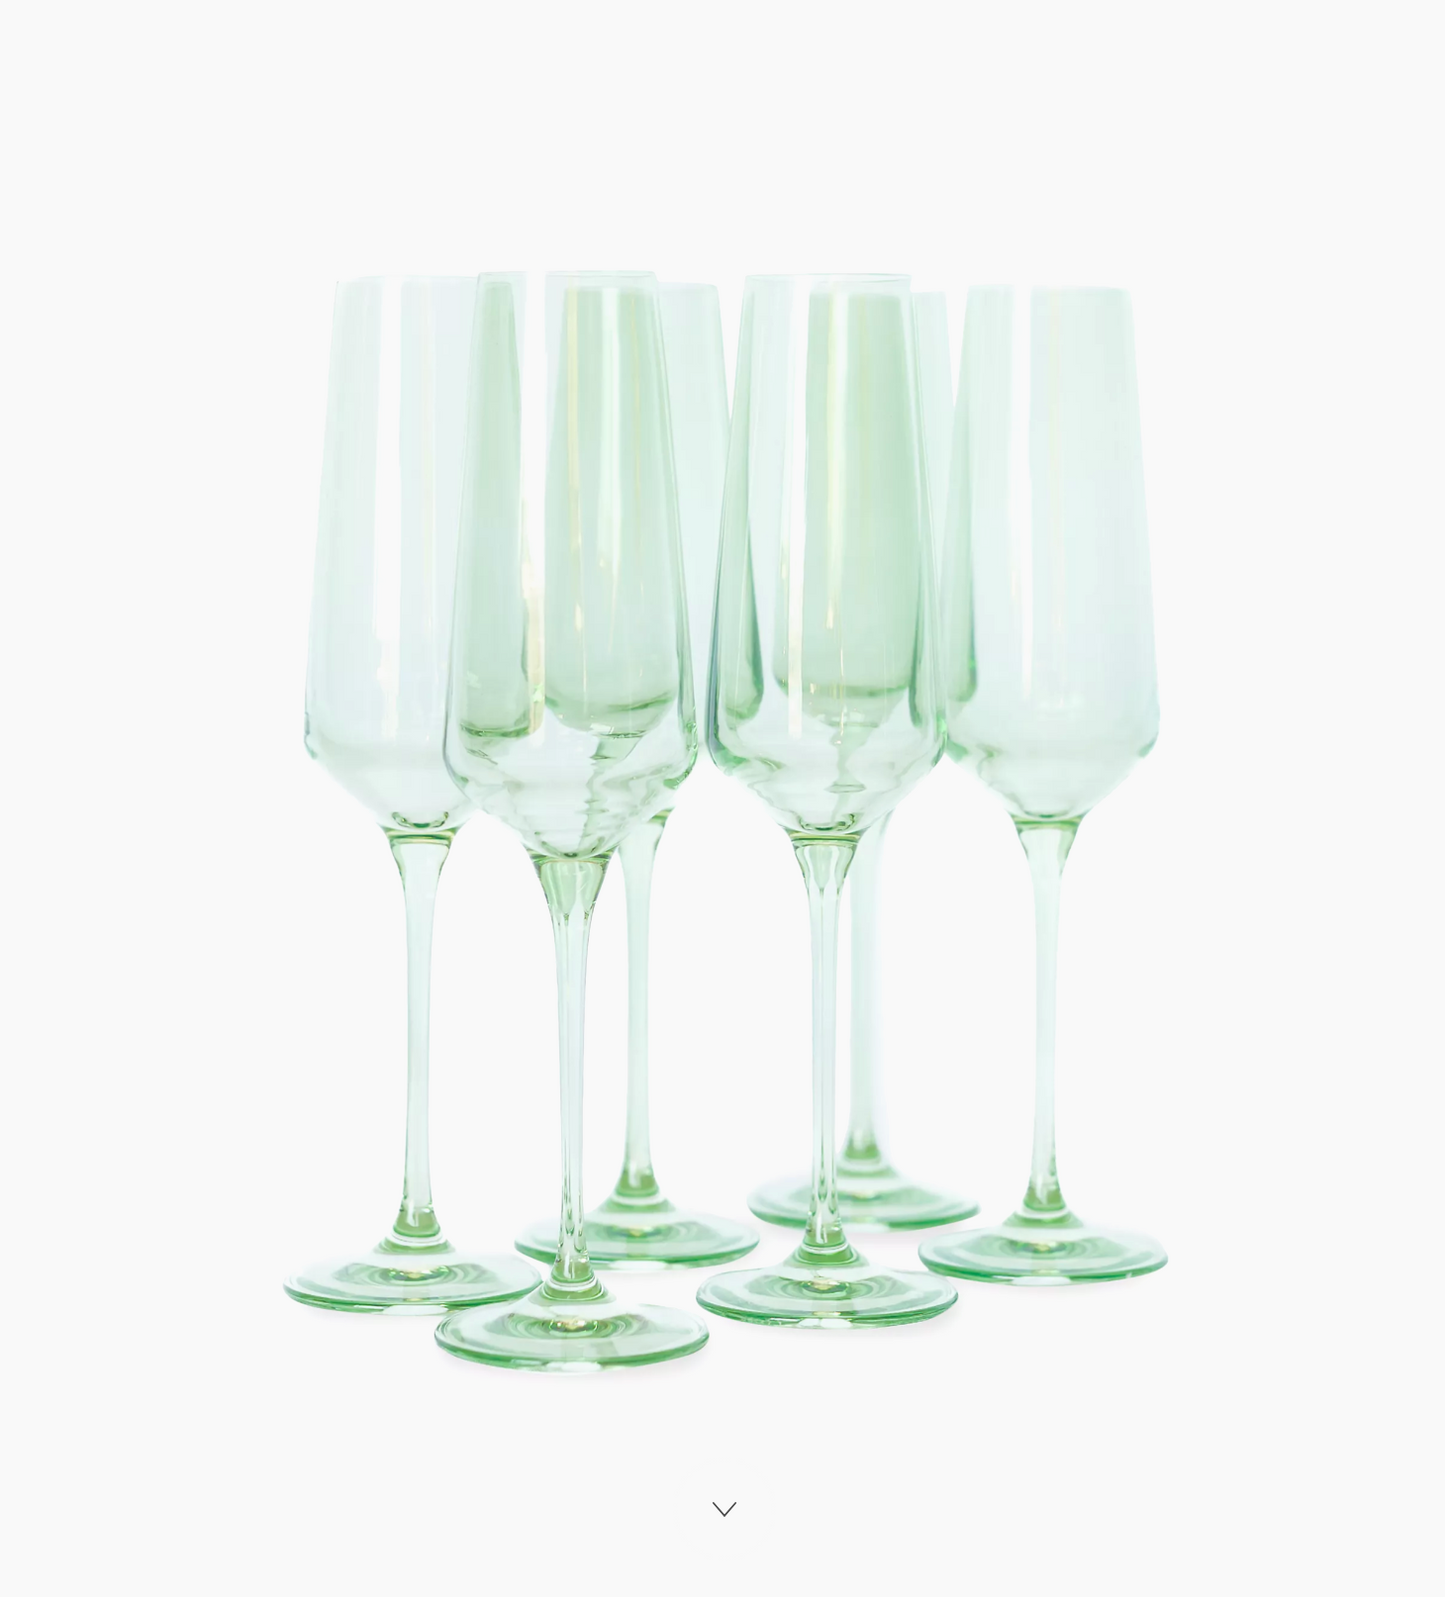 Colored Champagne Flute - Mint Green - Estelle Colored Glass (Set of 6)